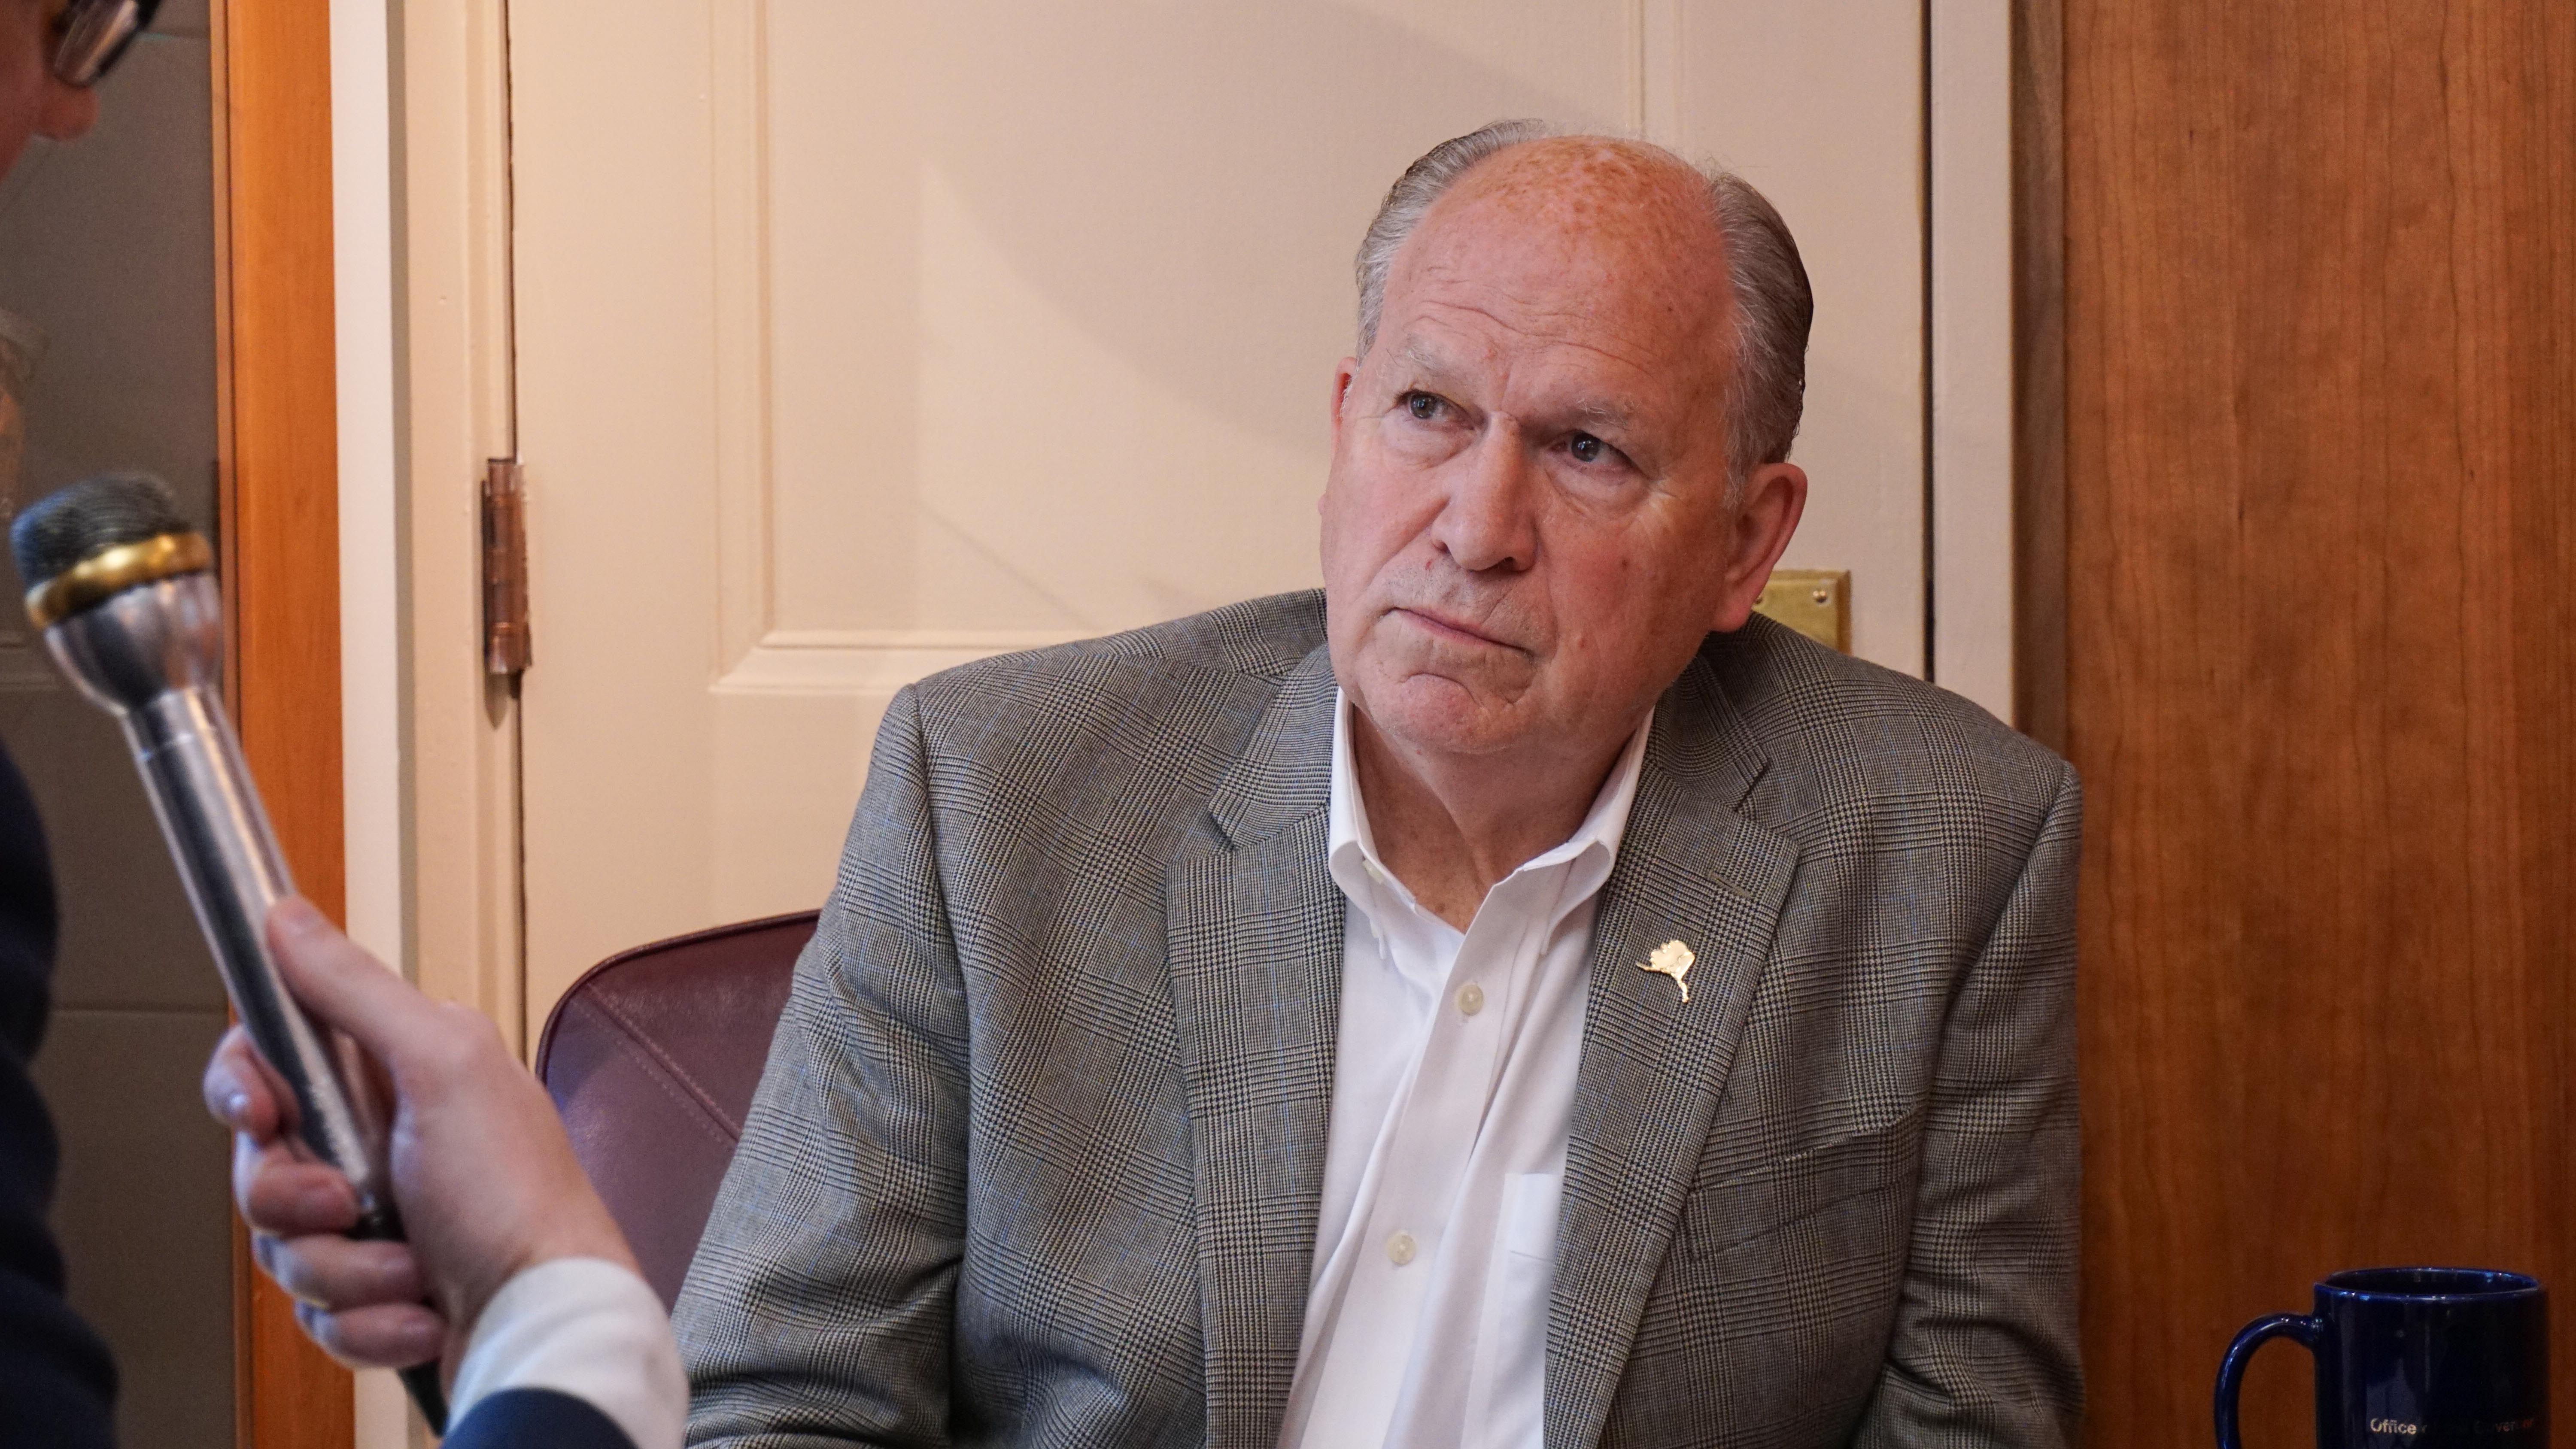 Alaska Gov. Bill Walker listens to a question from KTOO and Alaska Public Media reporter Andrew Kitchenman in his Capitol office in Juneau on June 19, 2018.